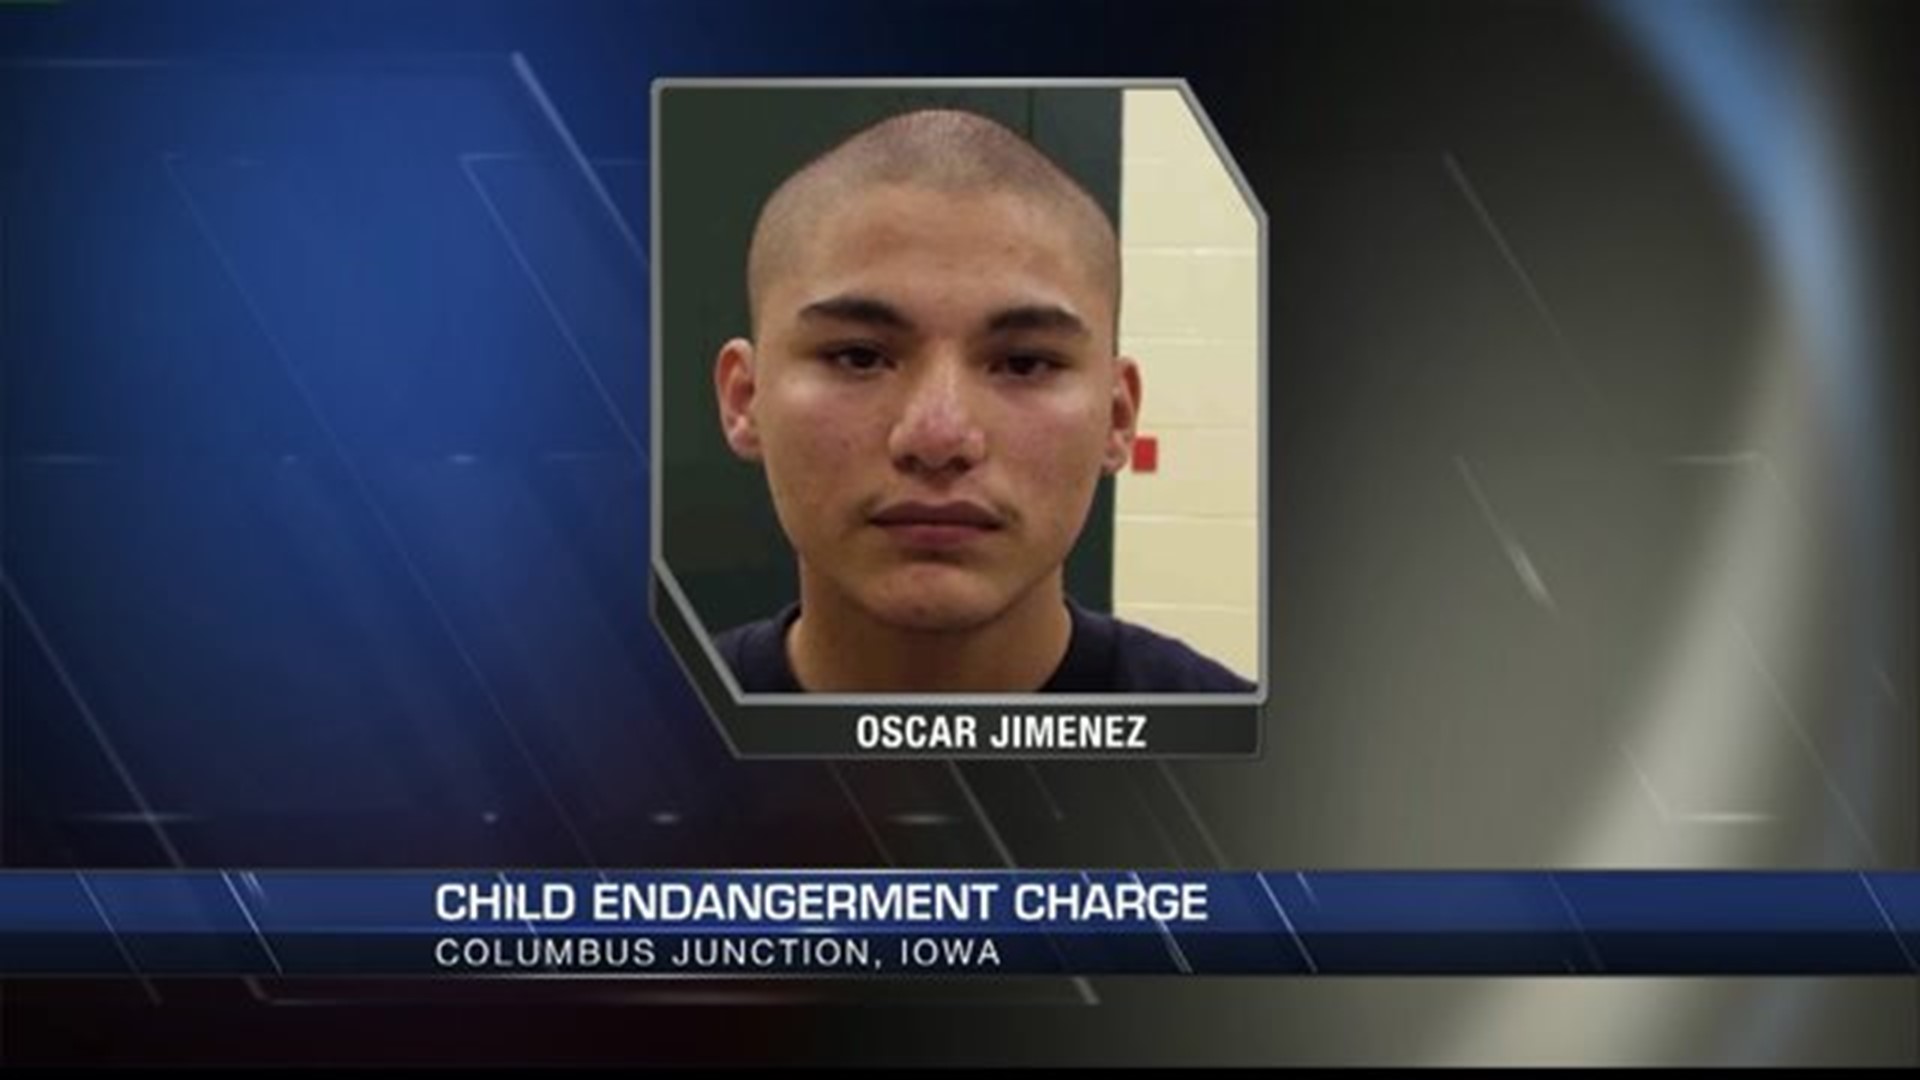 Columbus Junction man accused of endangering 4-month-old